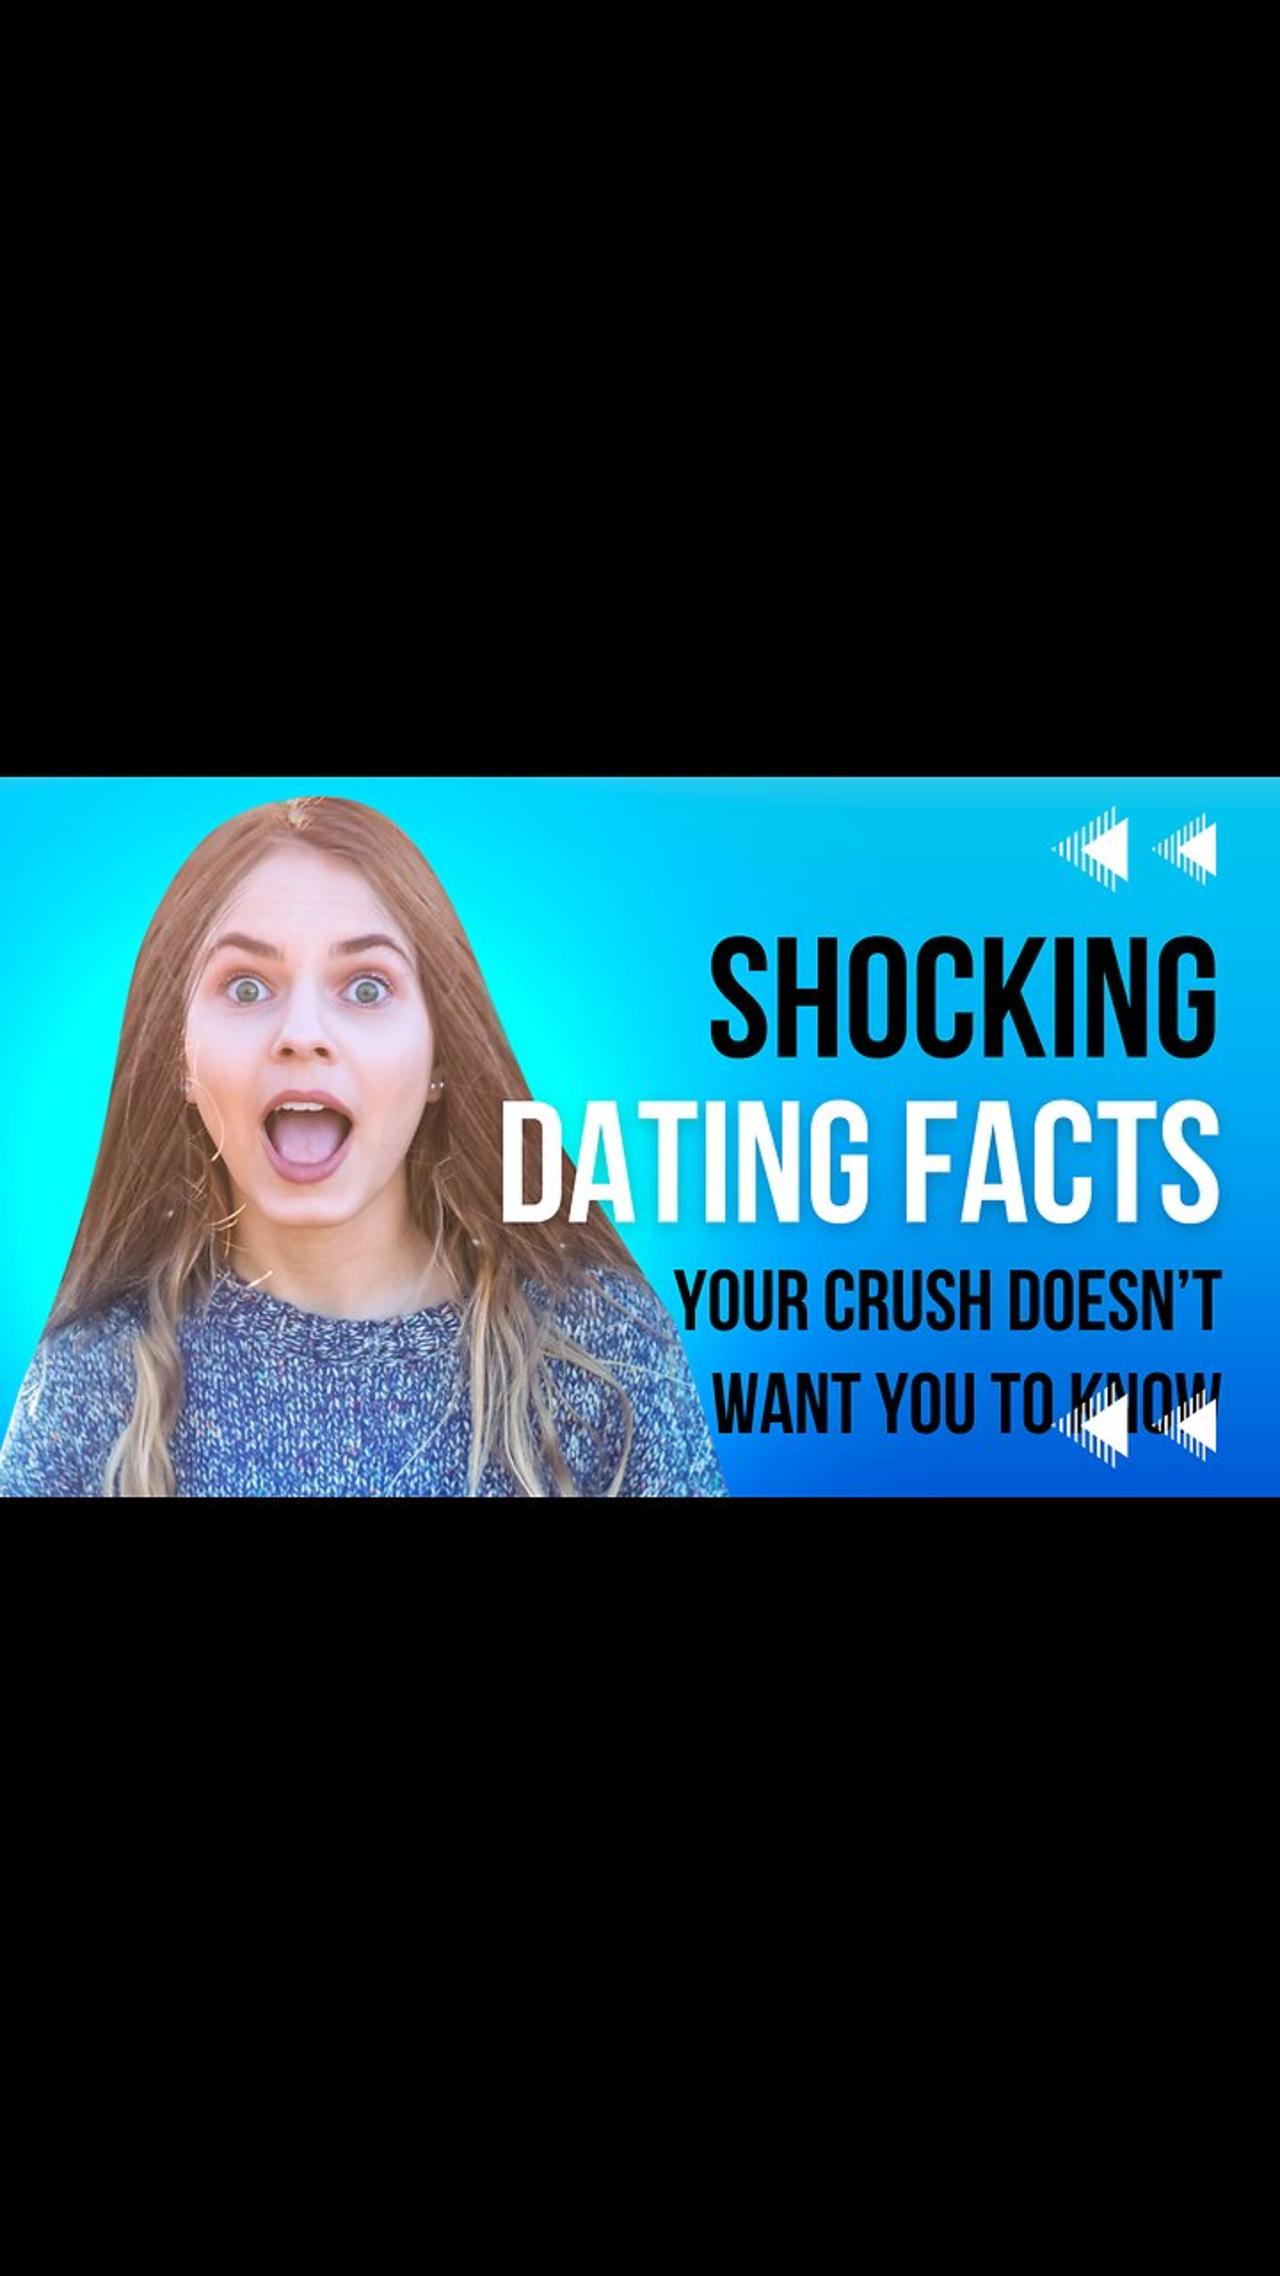 SHOCKING Dating Tips Your CRUSH Doesn’t Want You To Know About Them